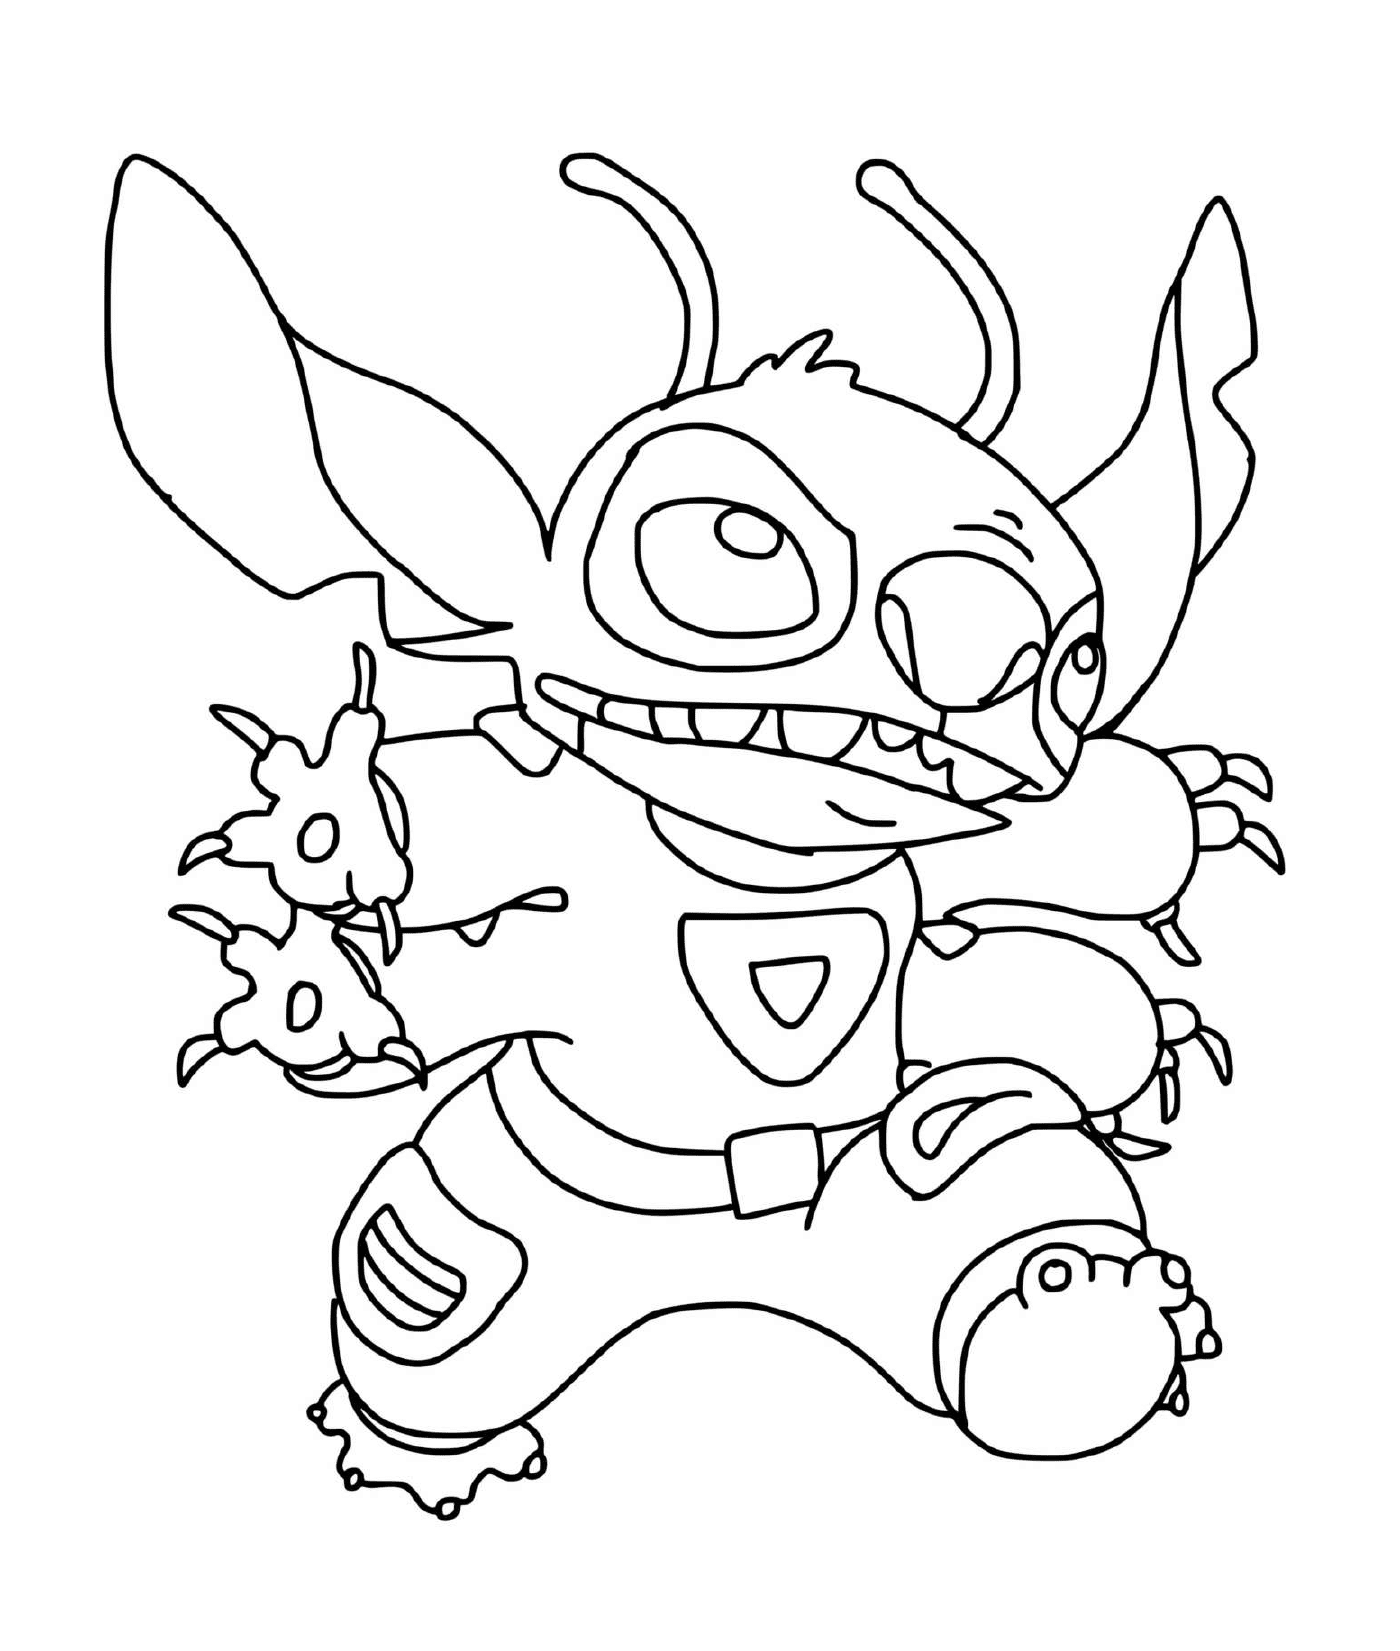 coloriage stitch en mode extraterrestre angrybird54